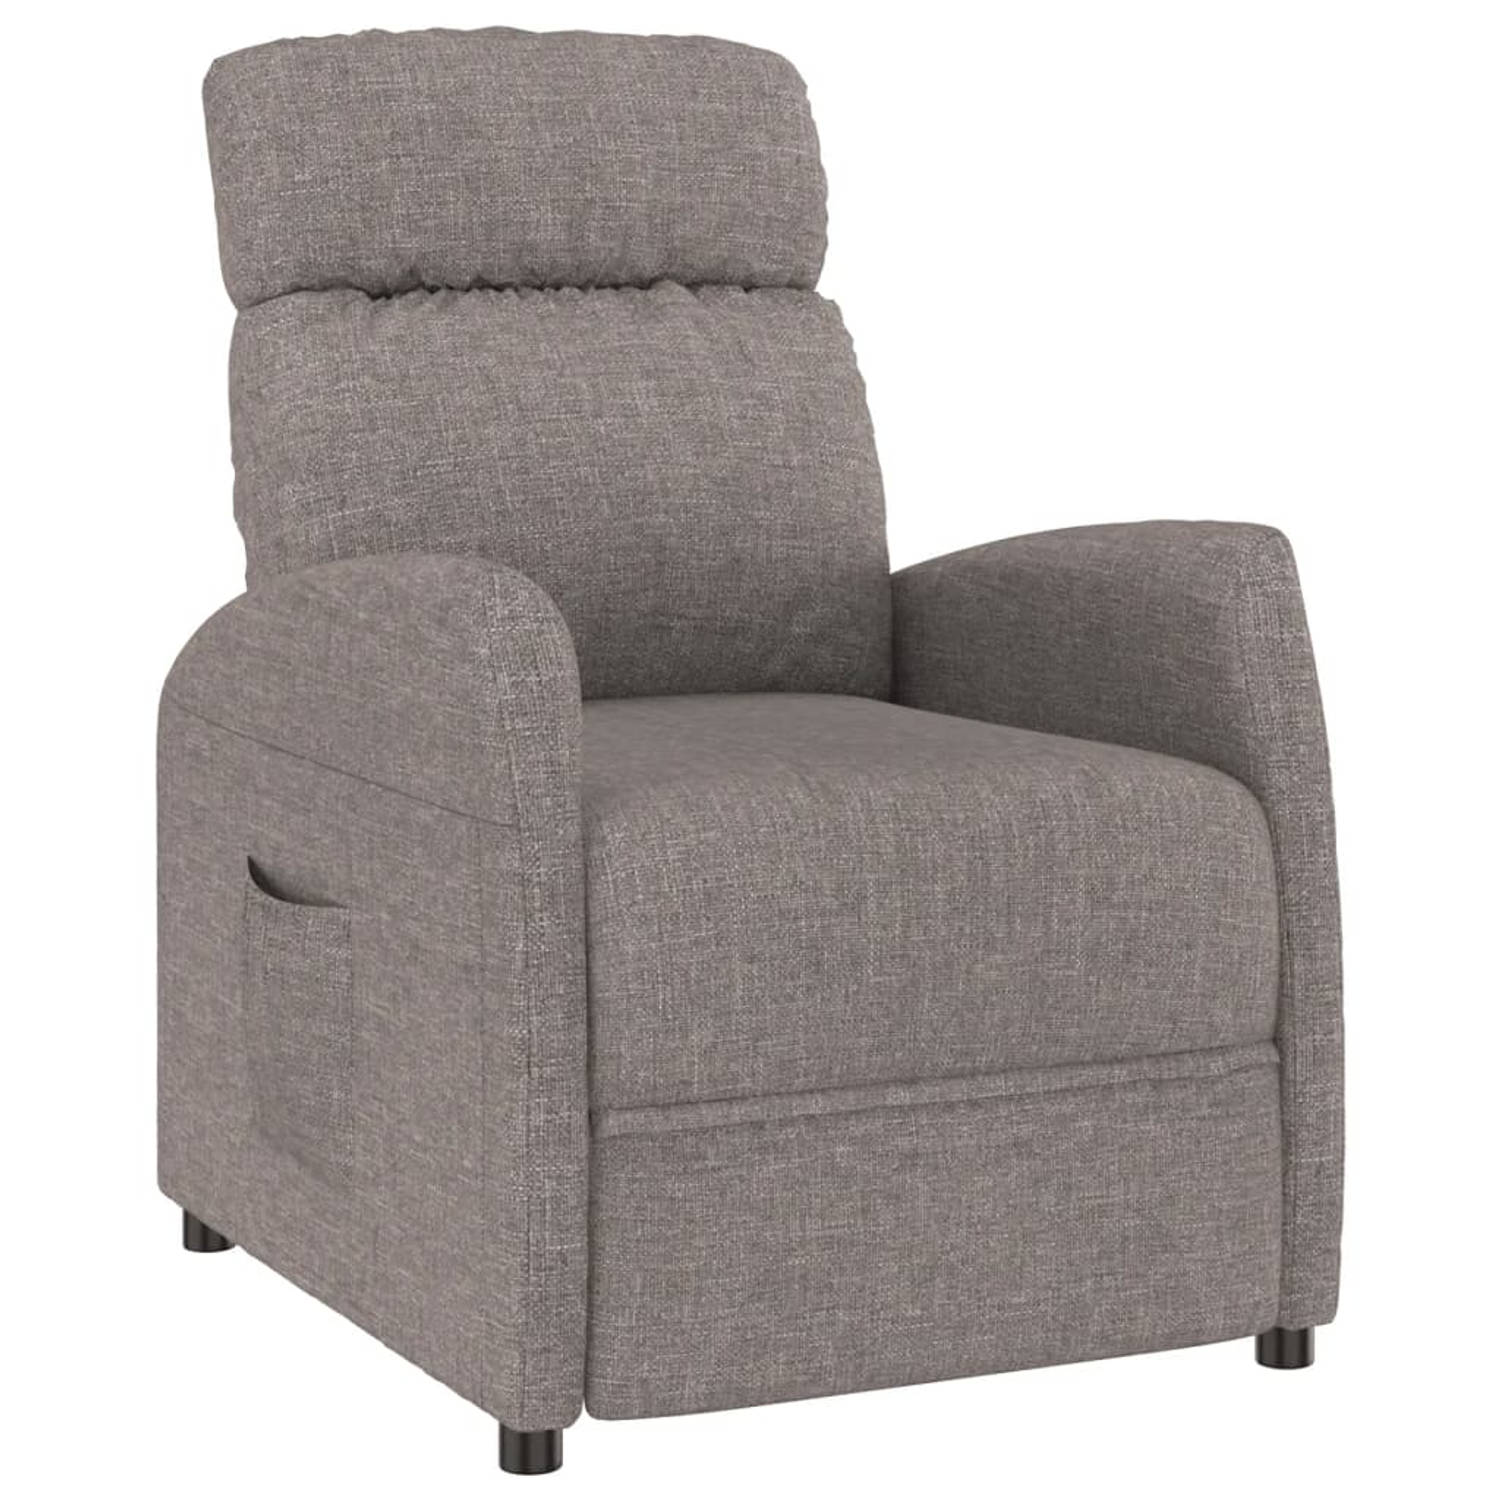 The Living Store Verstelbare Fauteuil - Stof - 67 x 86 x 100 cm - Taupe